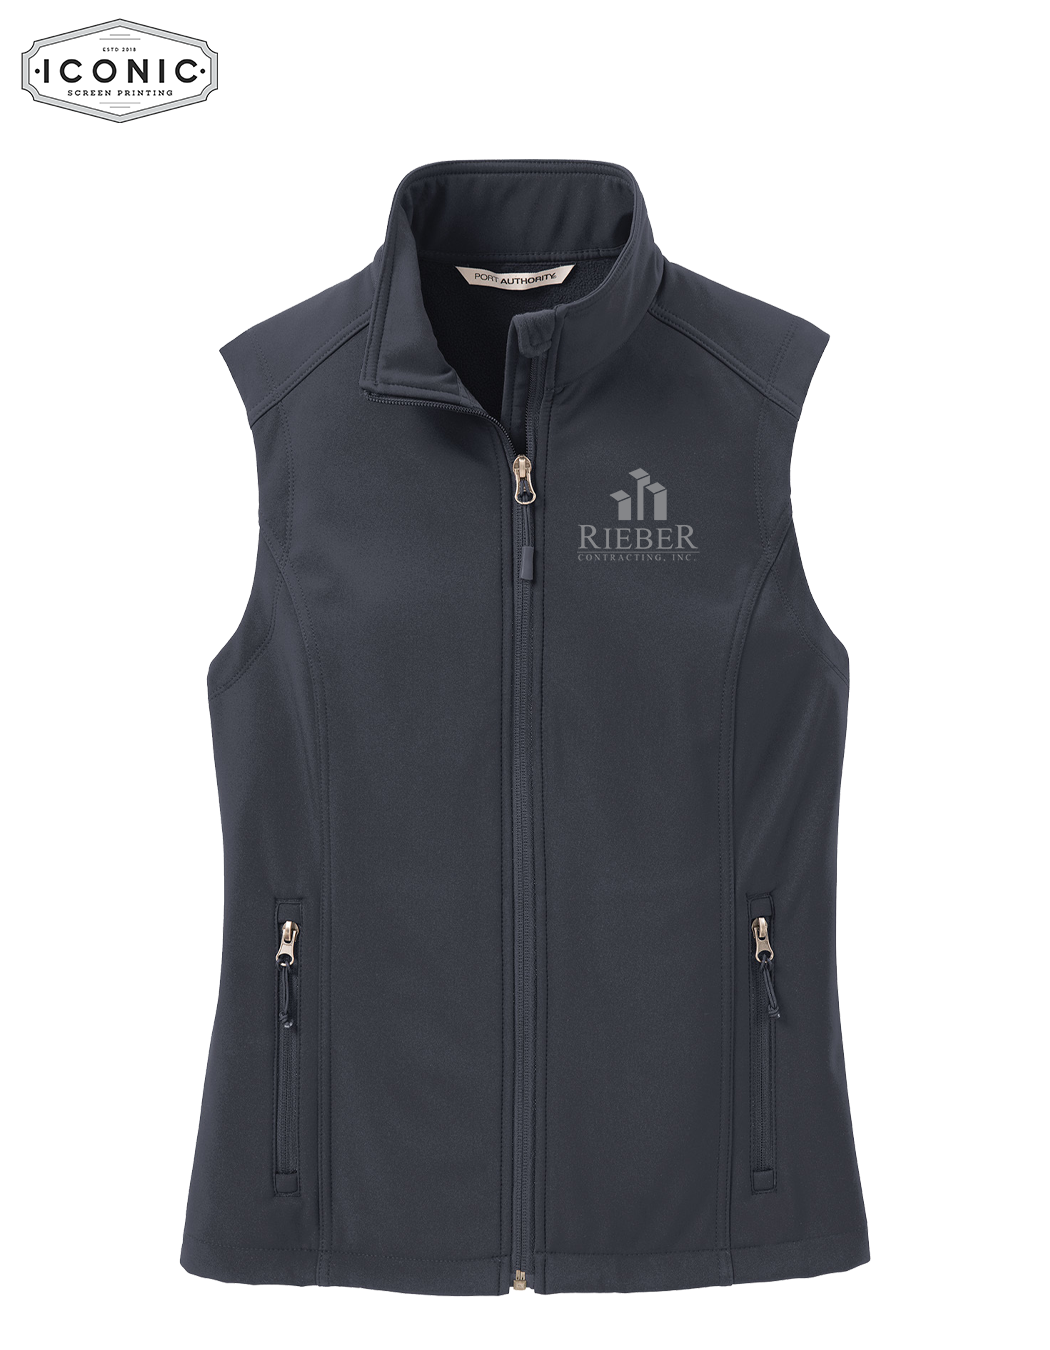 Rieber Contracting - Ladies Core Soft Shell Vest - Embroidery